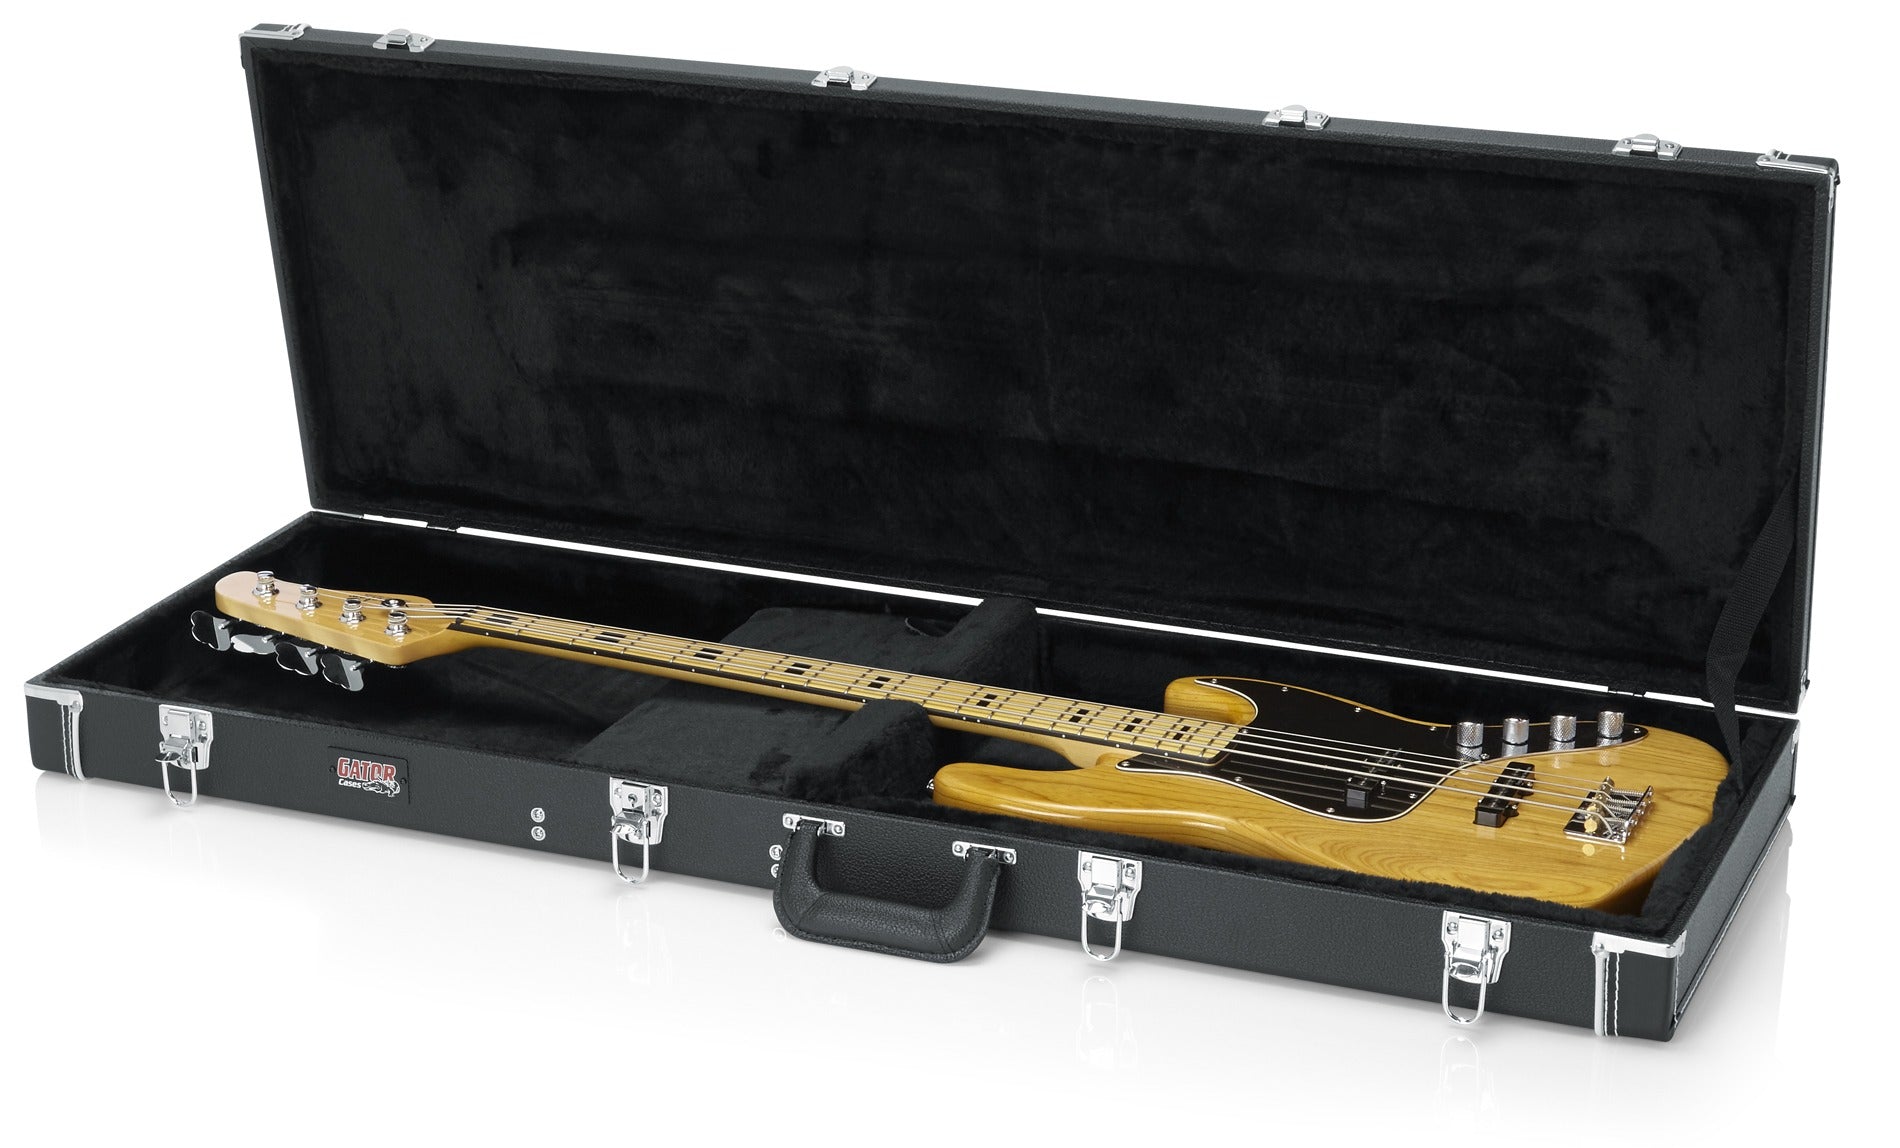 GATOR CASES GWBASS Deluxe Laminated Wood Bass Guitar Case